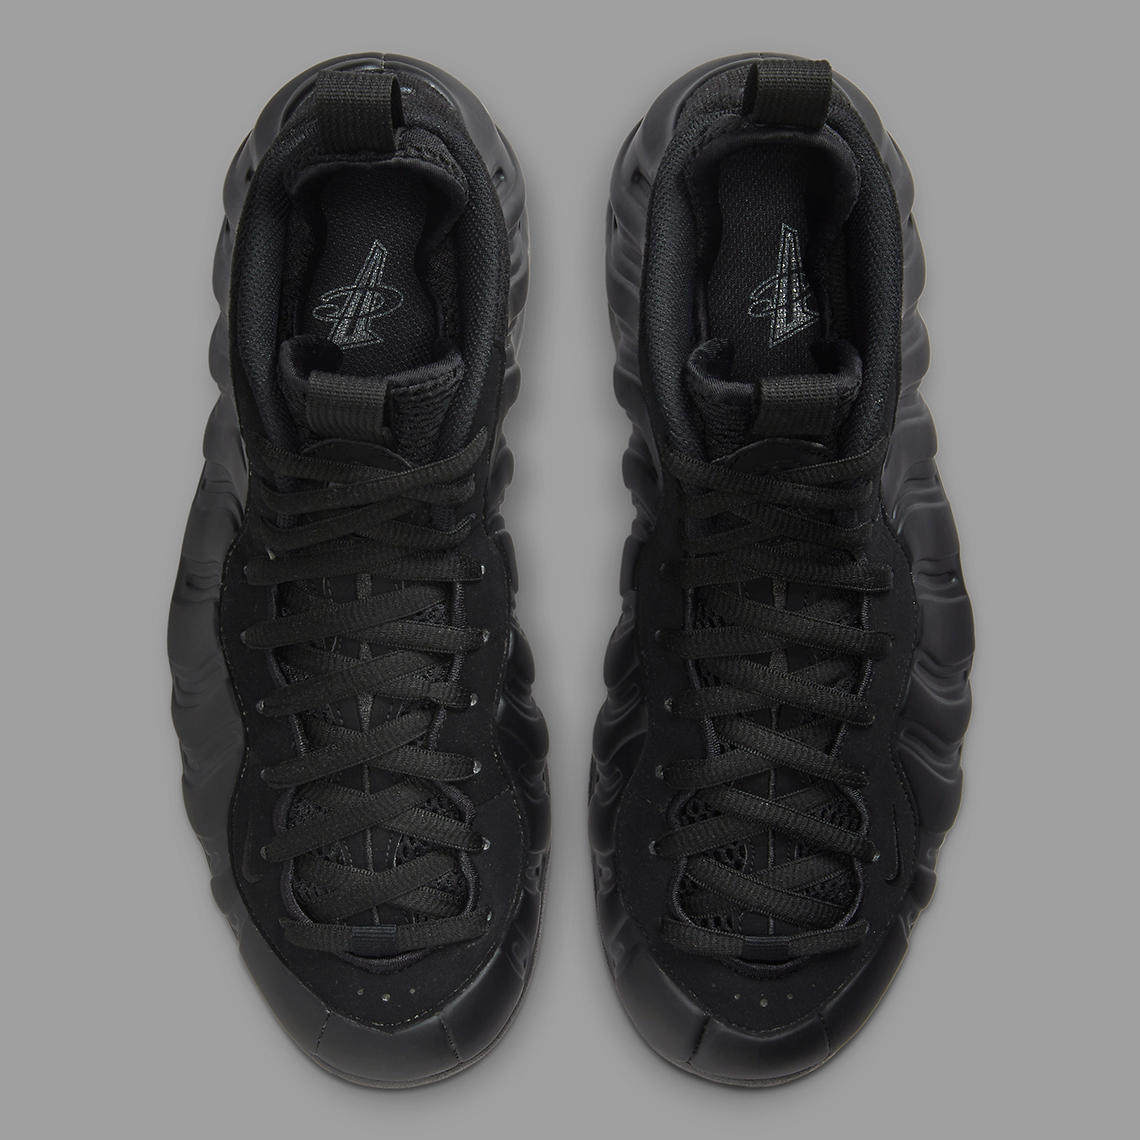 Nike Air Foamposite Anthracite Fd5855 001 1